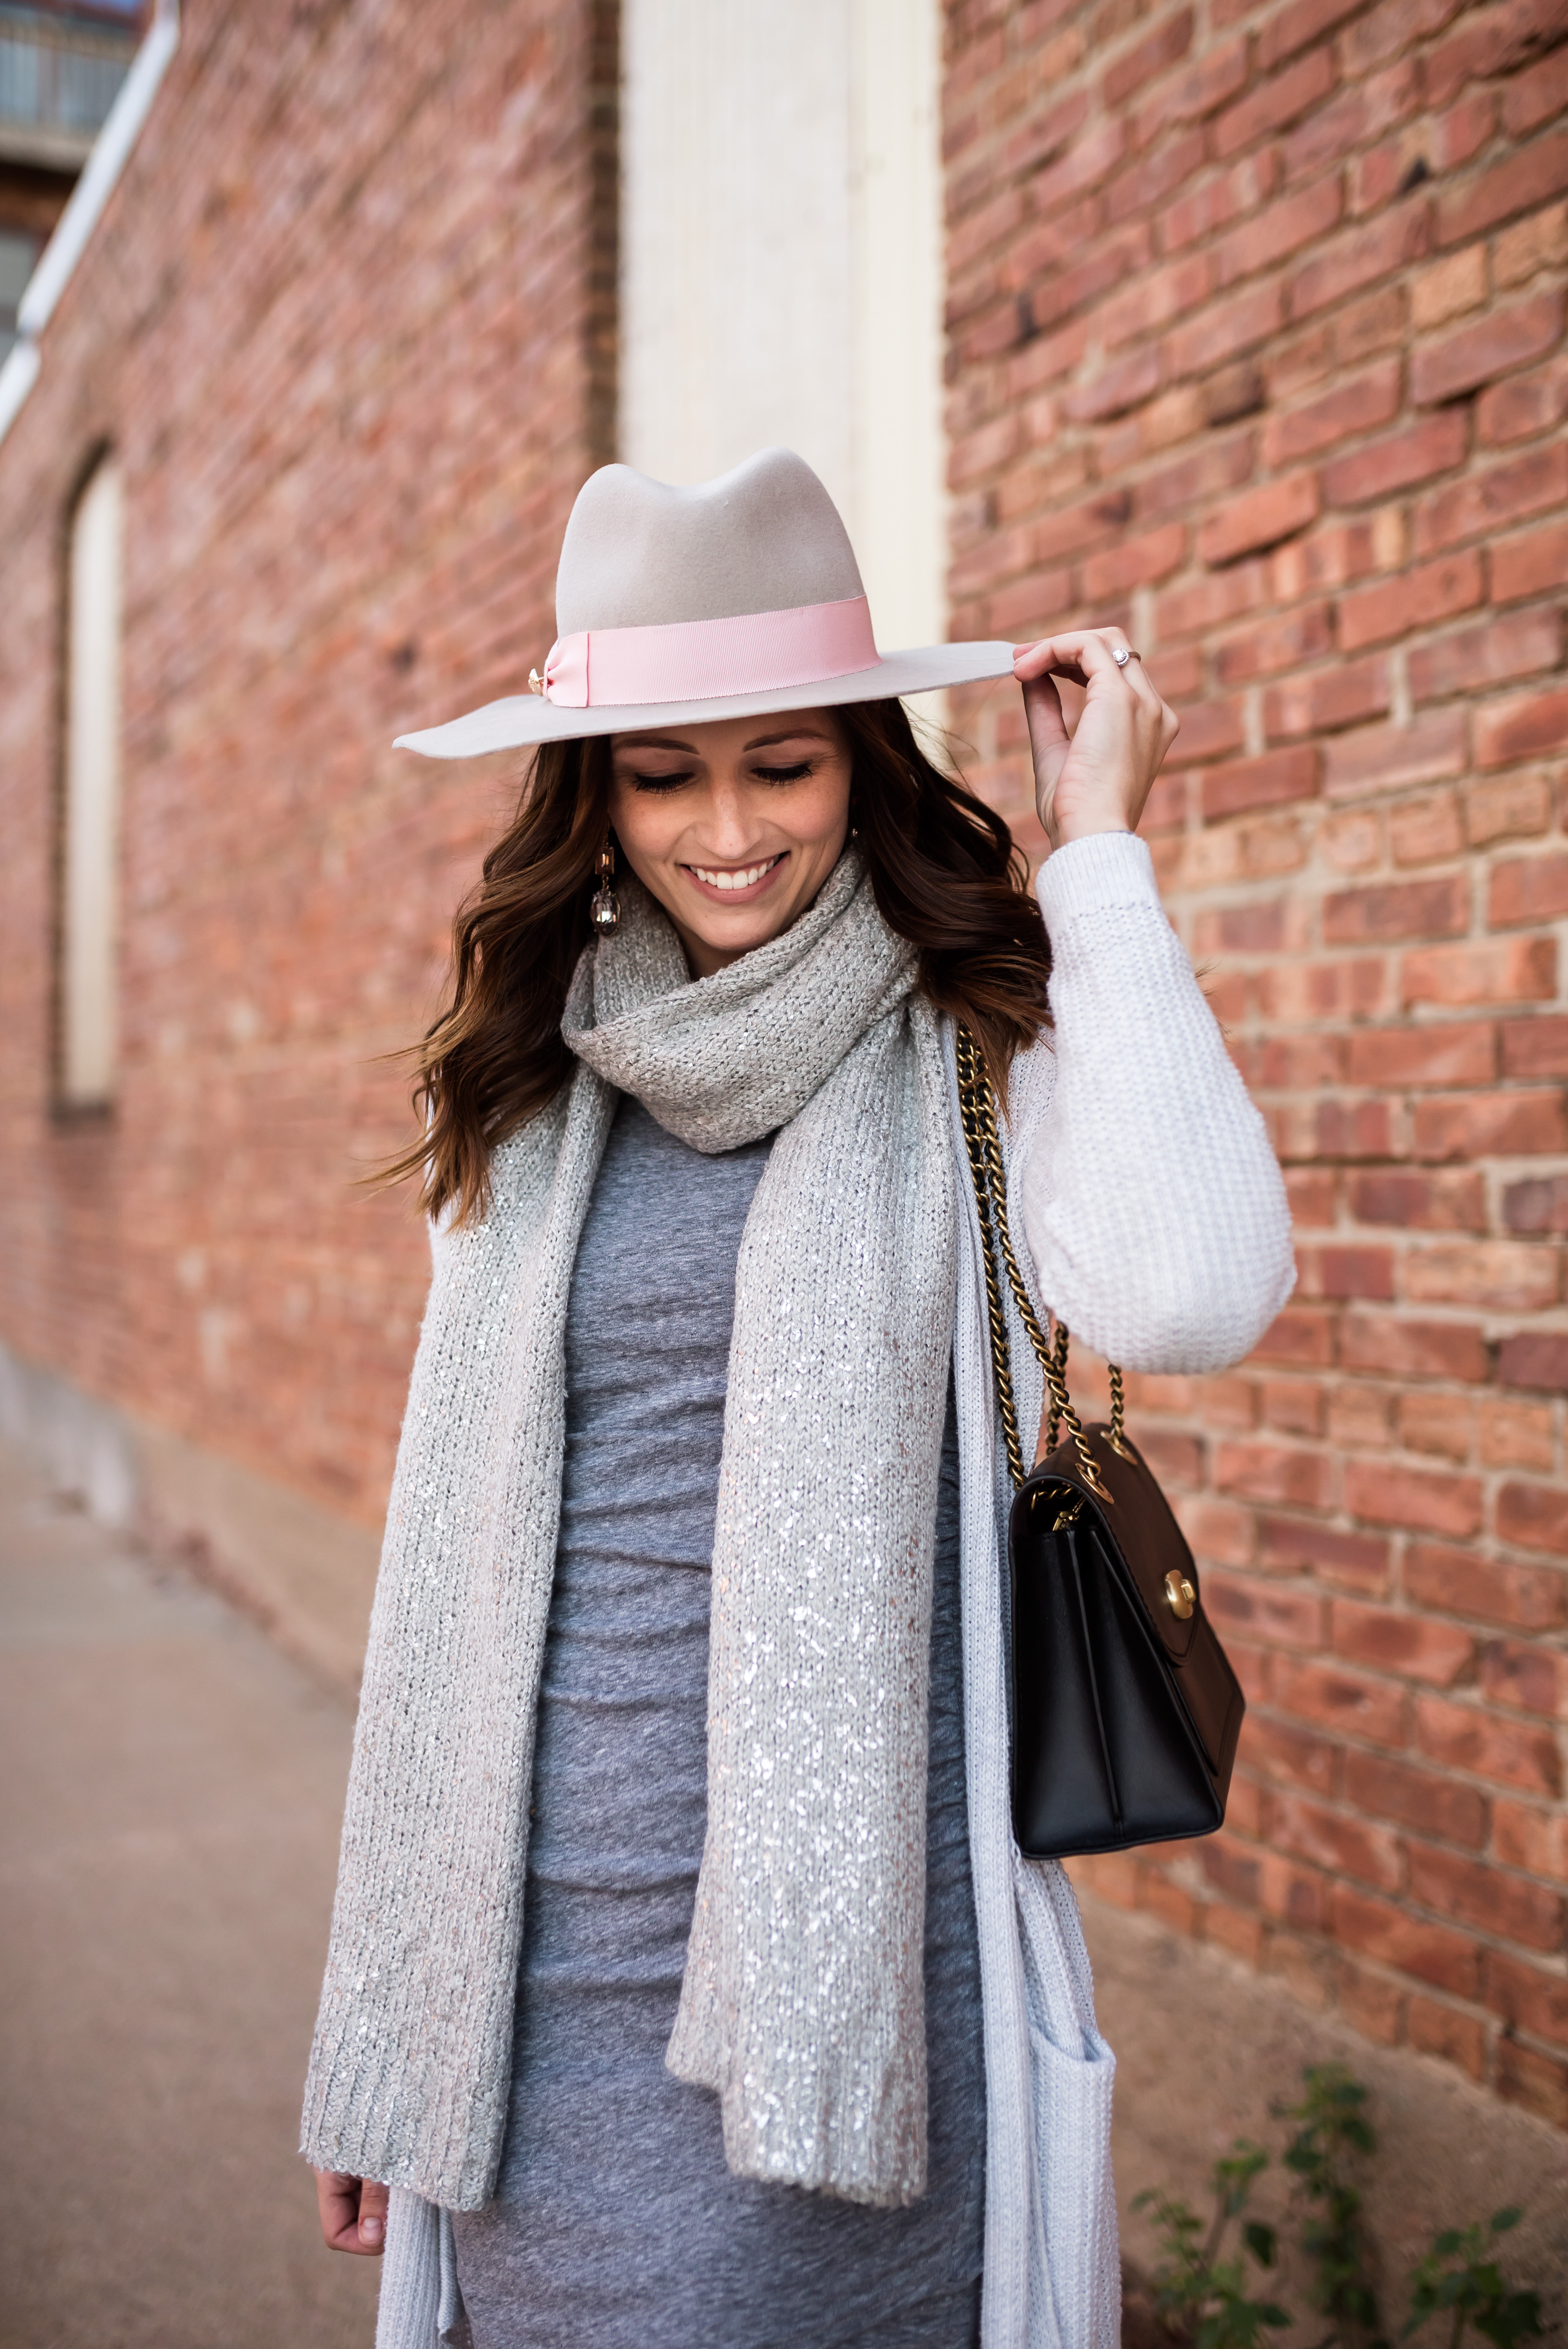 Long Sleeve Dress and Cardigan - Midwest In Style